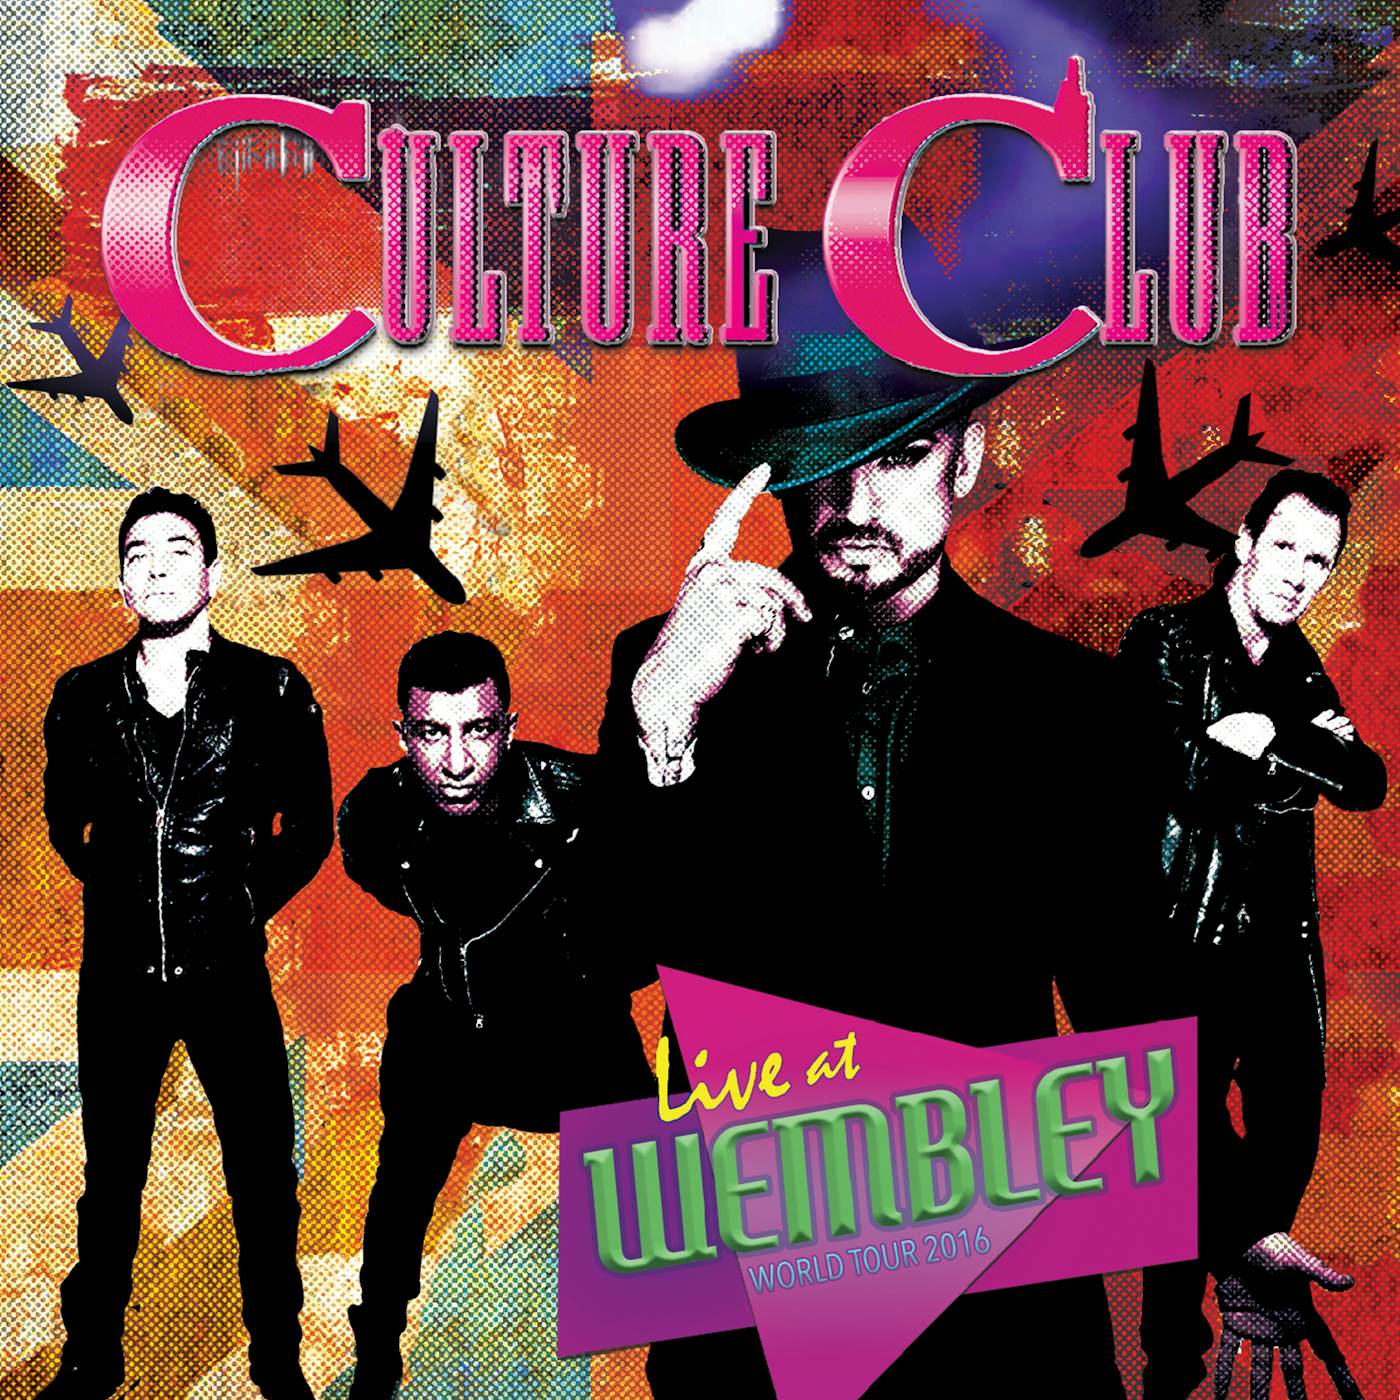 Culture Club LIVE AT WEMBLEY - WORLD TOUR 2016 - Limited Edition Colored Double Vinyl Record